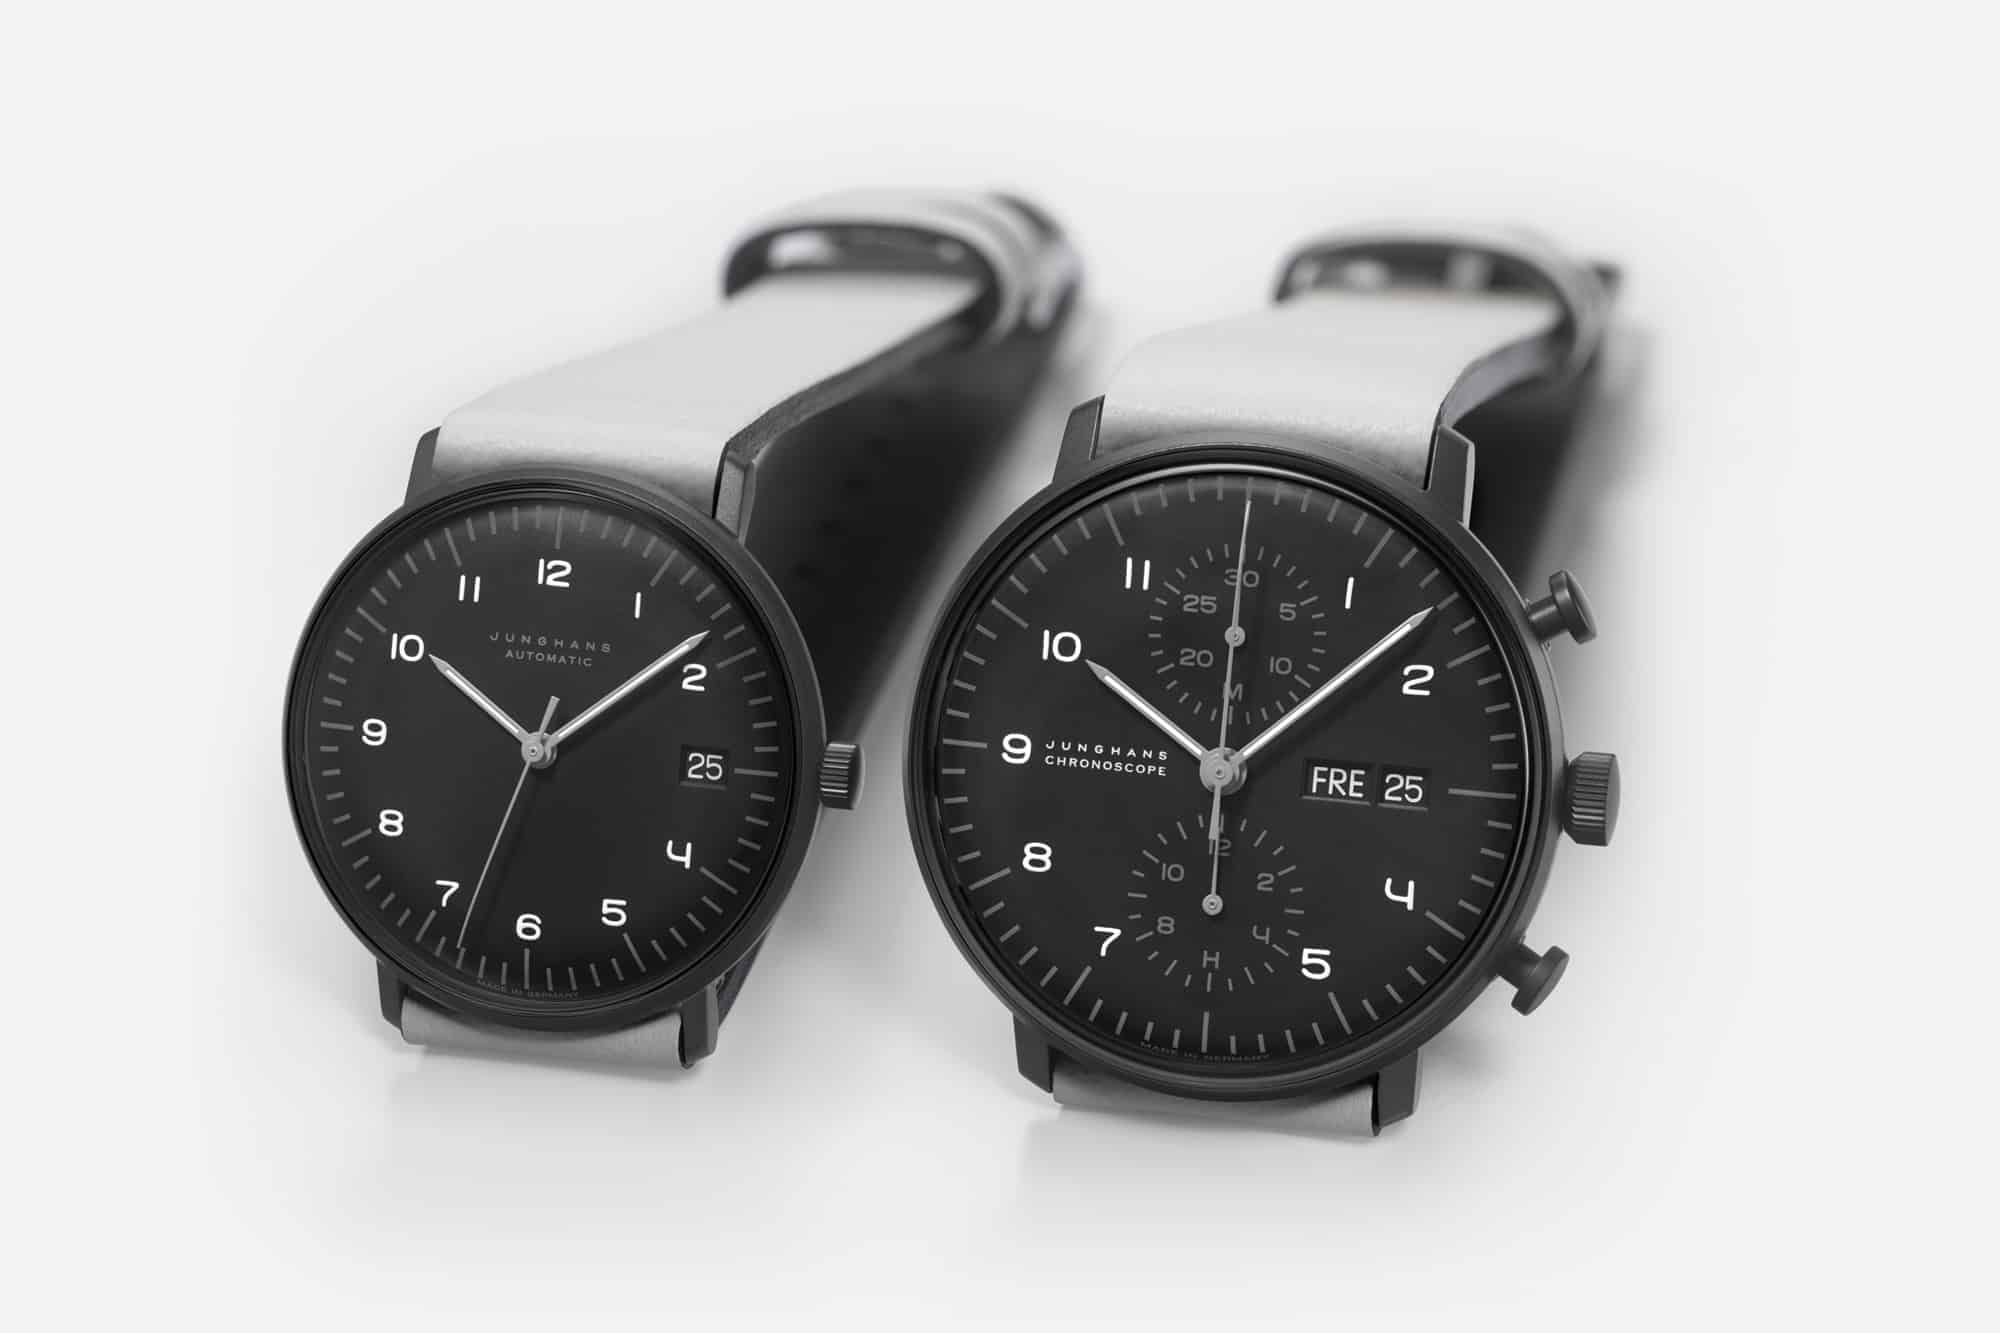 Junghans Introduces the Latest Max Bill Set, a Two Watch Limited Edition in Black & White